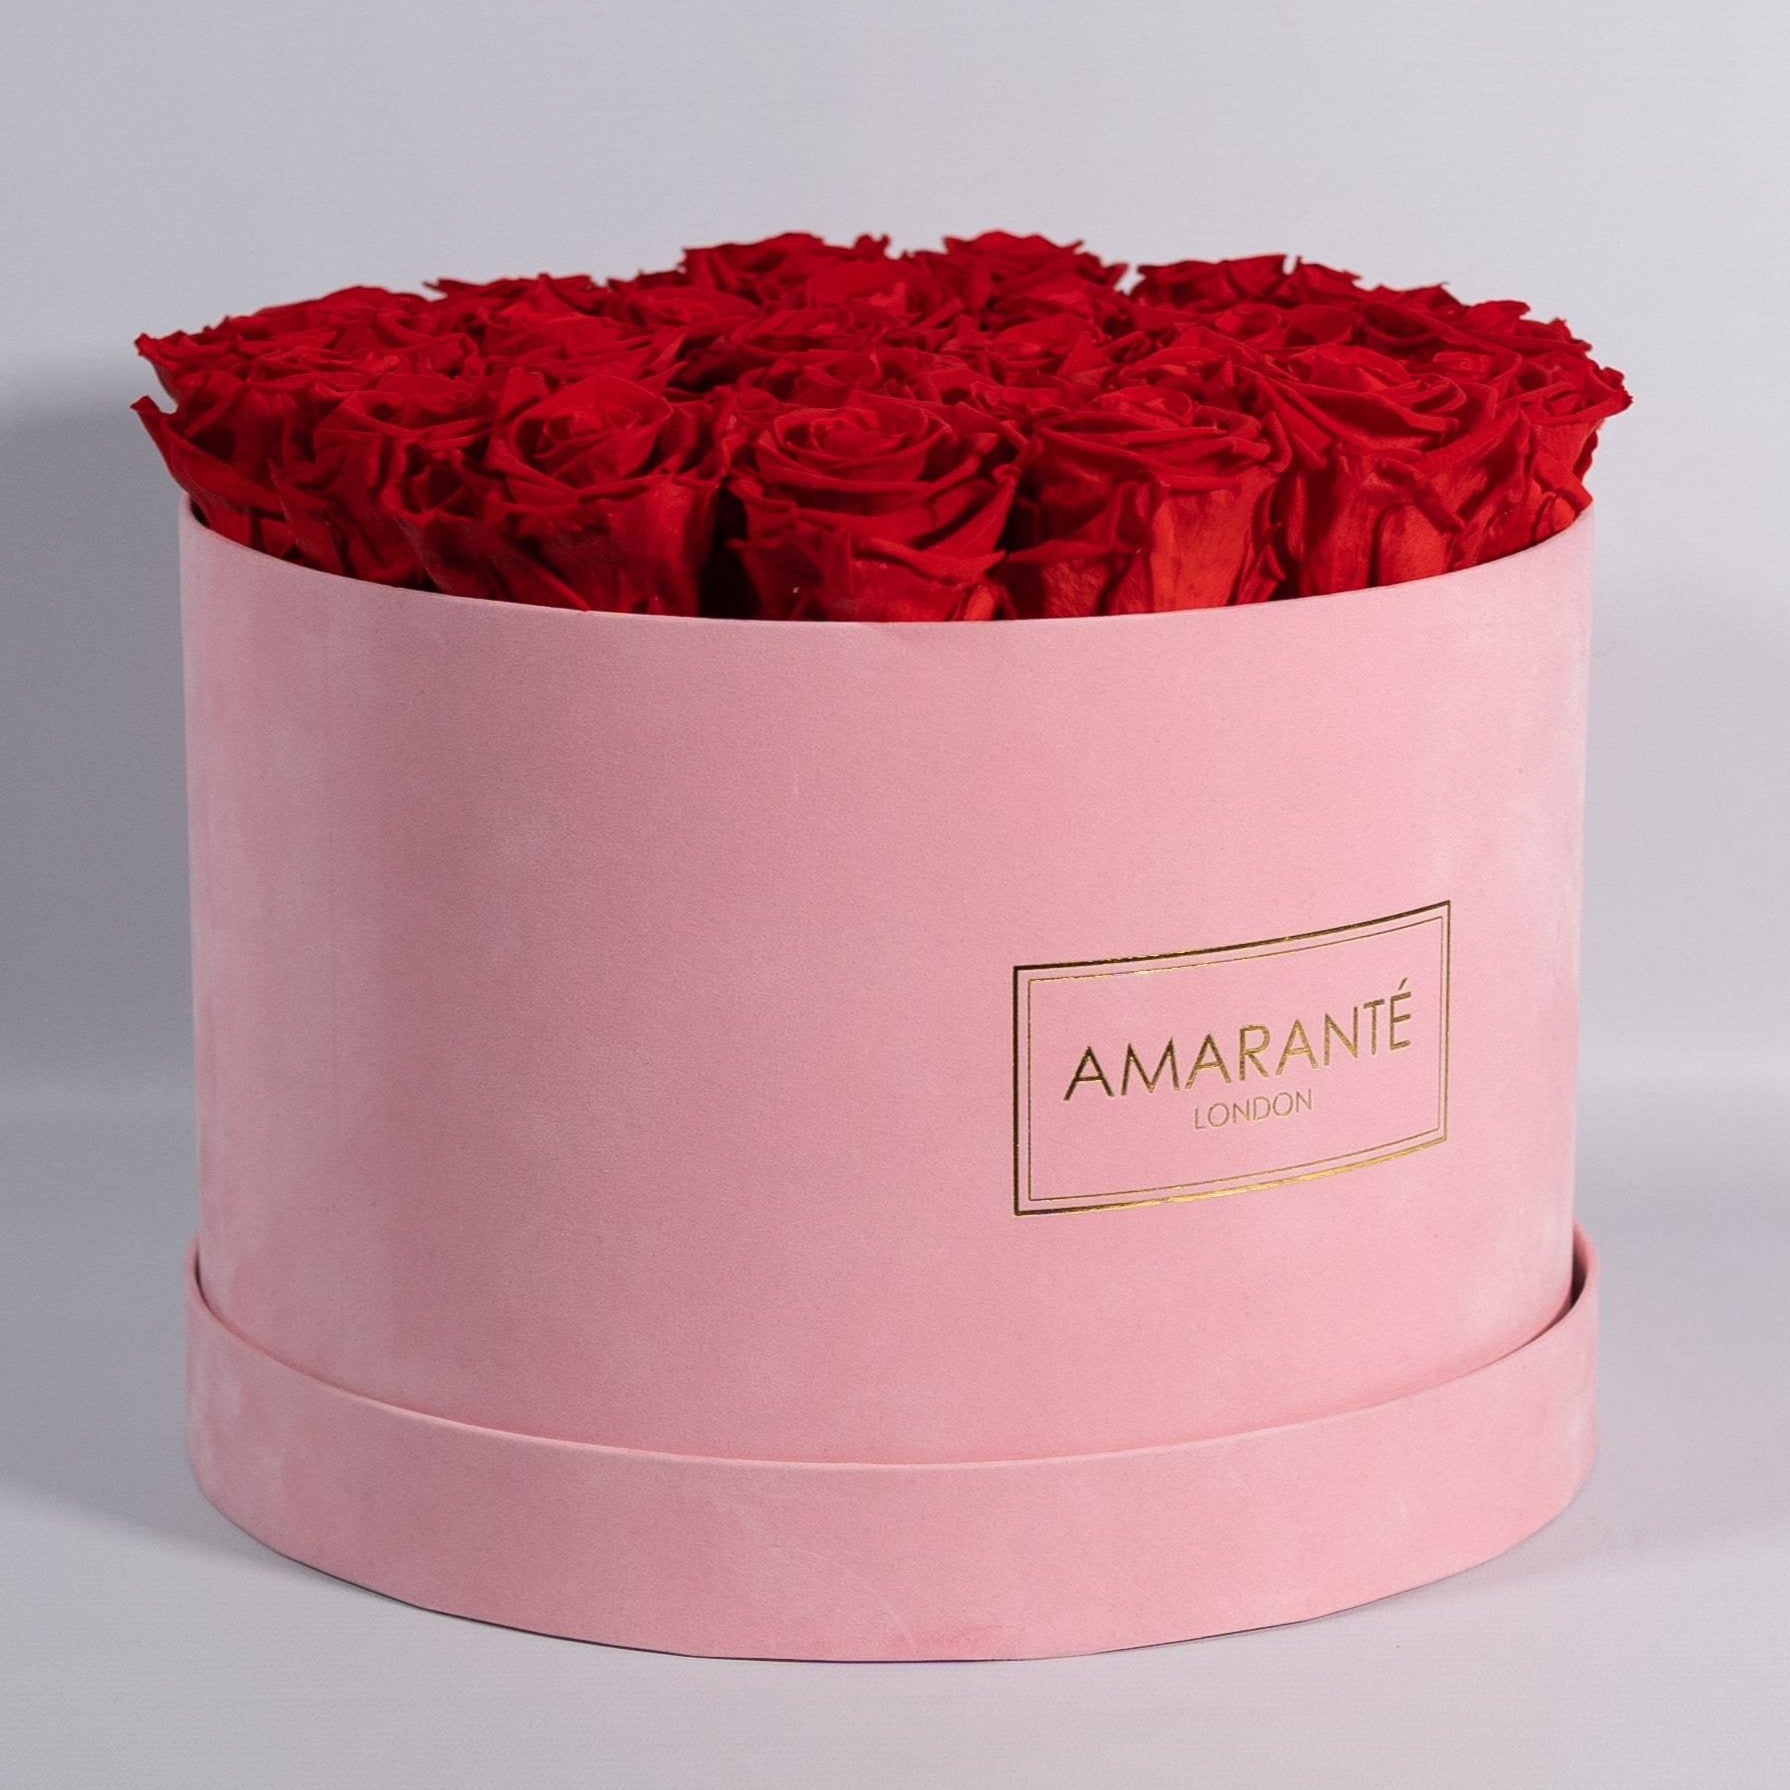 Divine red Roses shown in a magical pink suede box